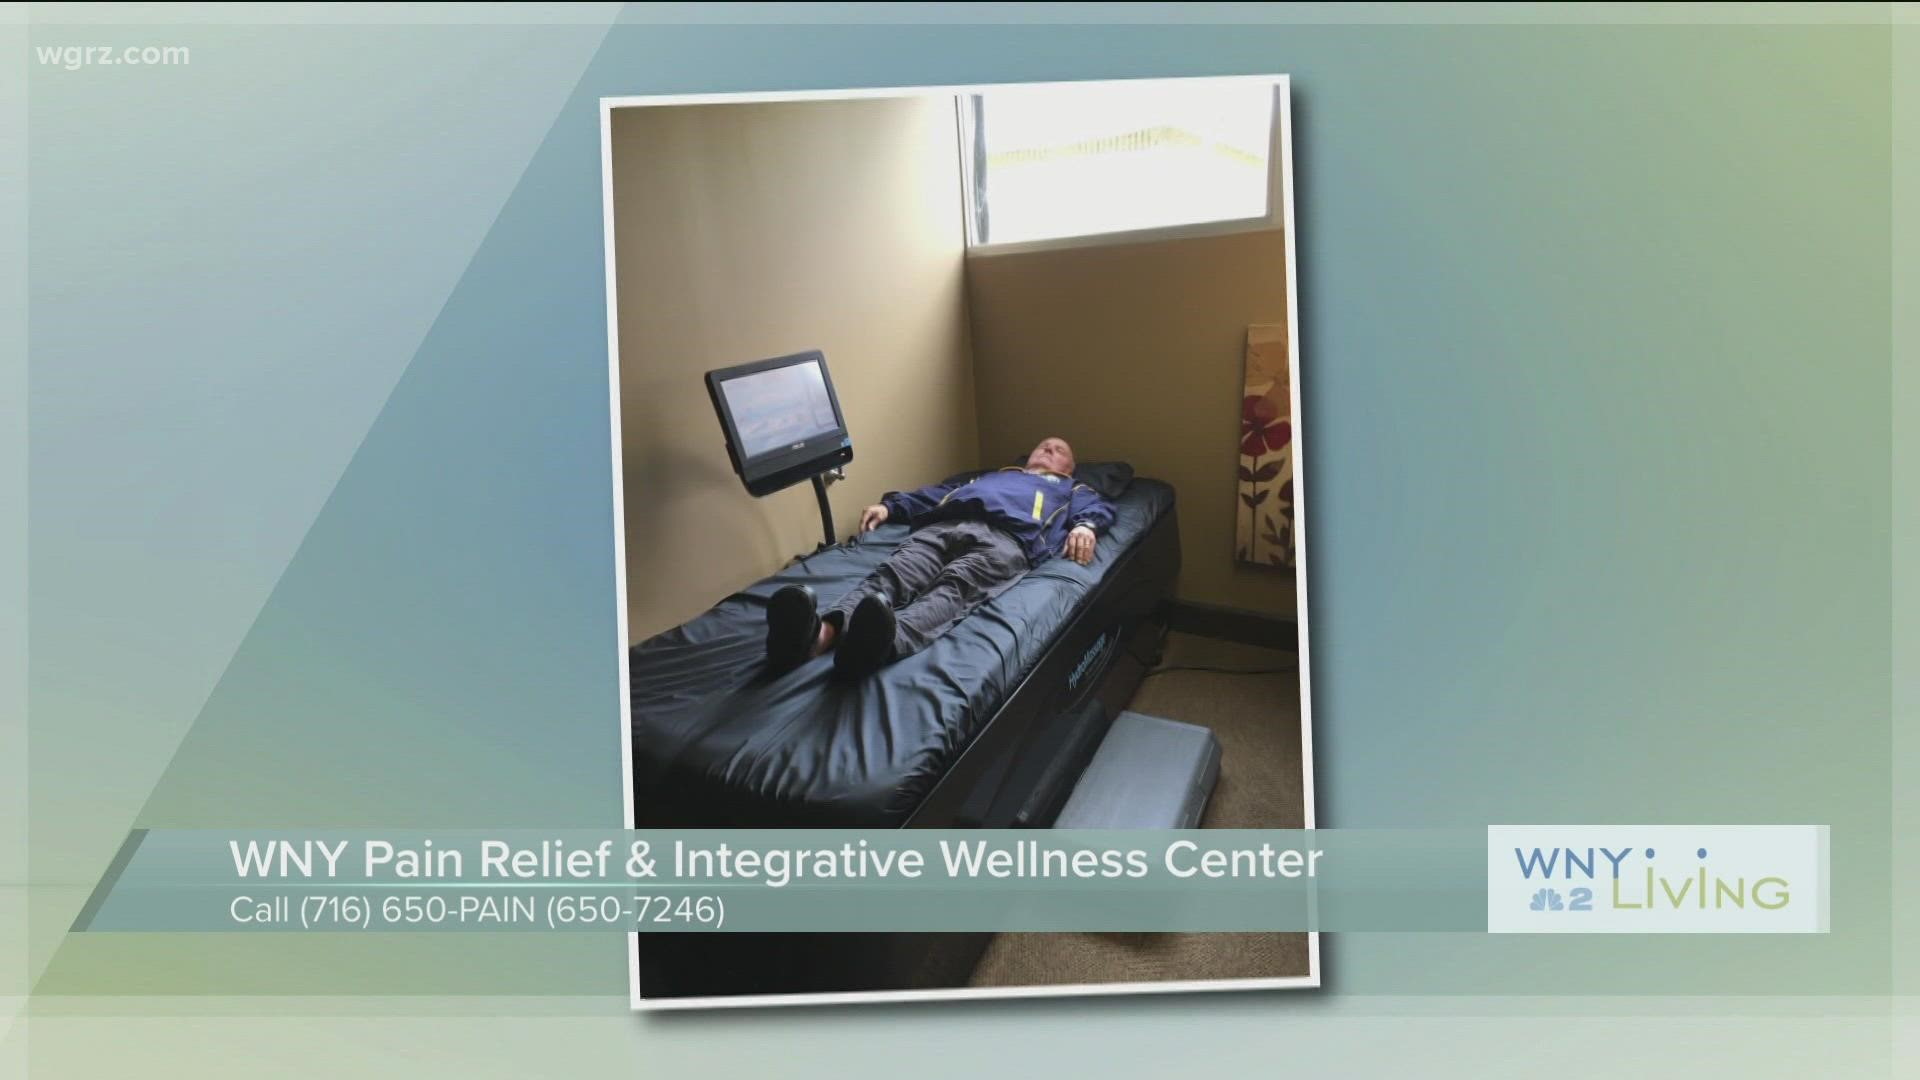 WNY Living  - July 2 - WNY Pain Relief & Integrative Wellness Center (THIS VIDEO IS SPONSORED BY WNY PAIN RELIEF & INTEGRATIVE WELLNESS CENTER)